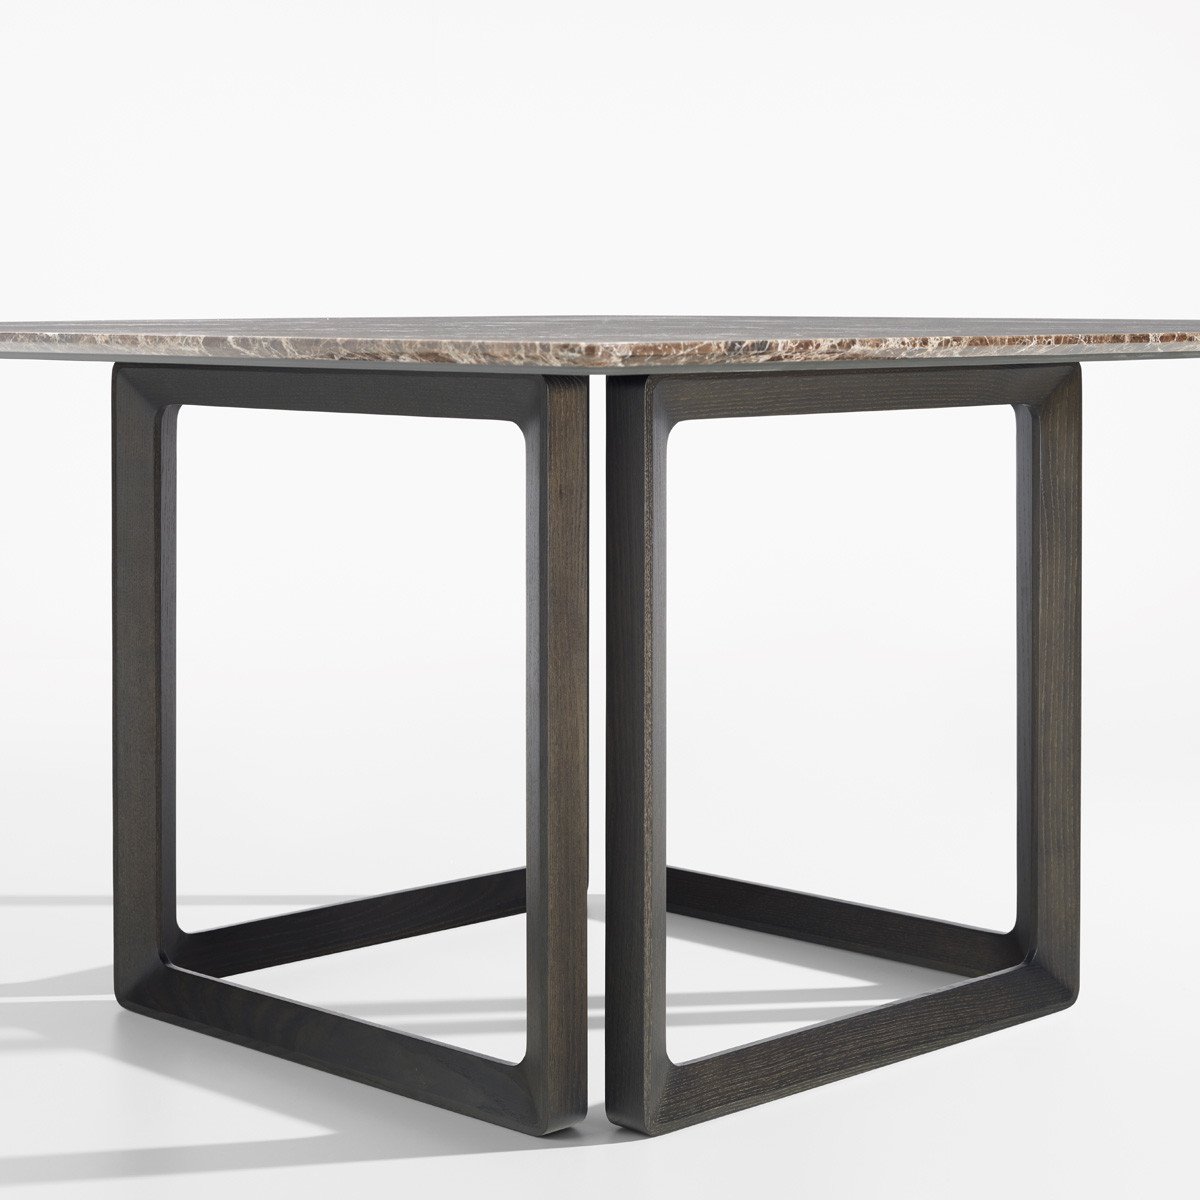 Opus Table dining from Potocco, designed by Bernhardt & Vella 